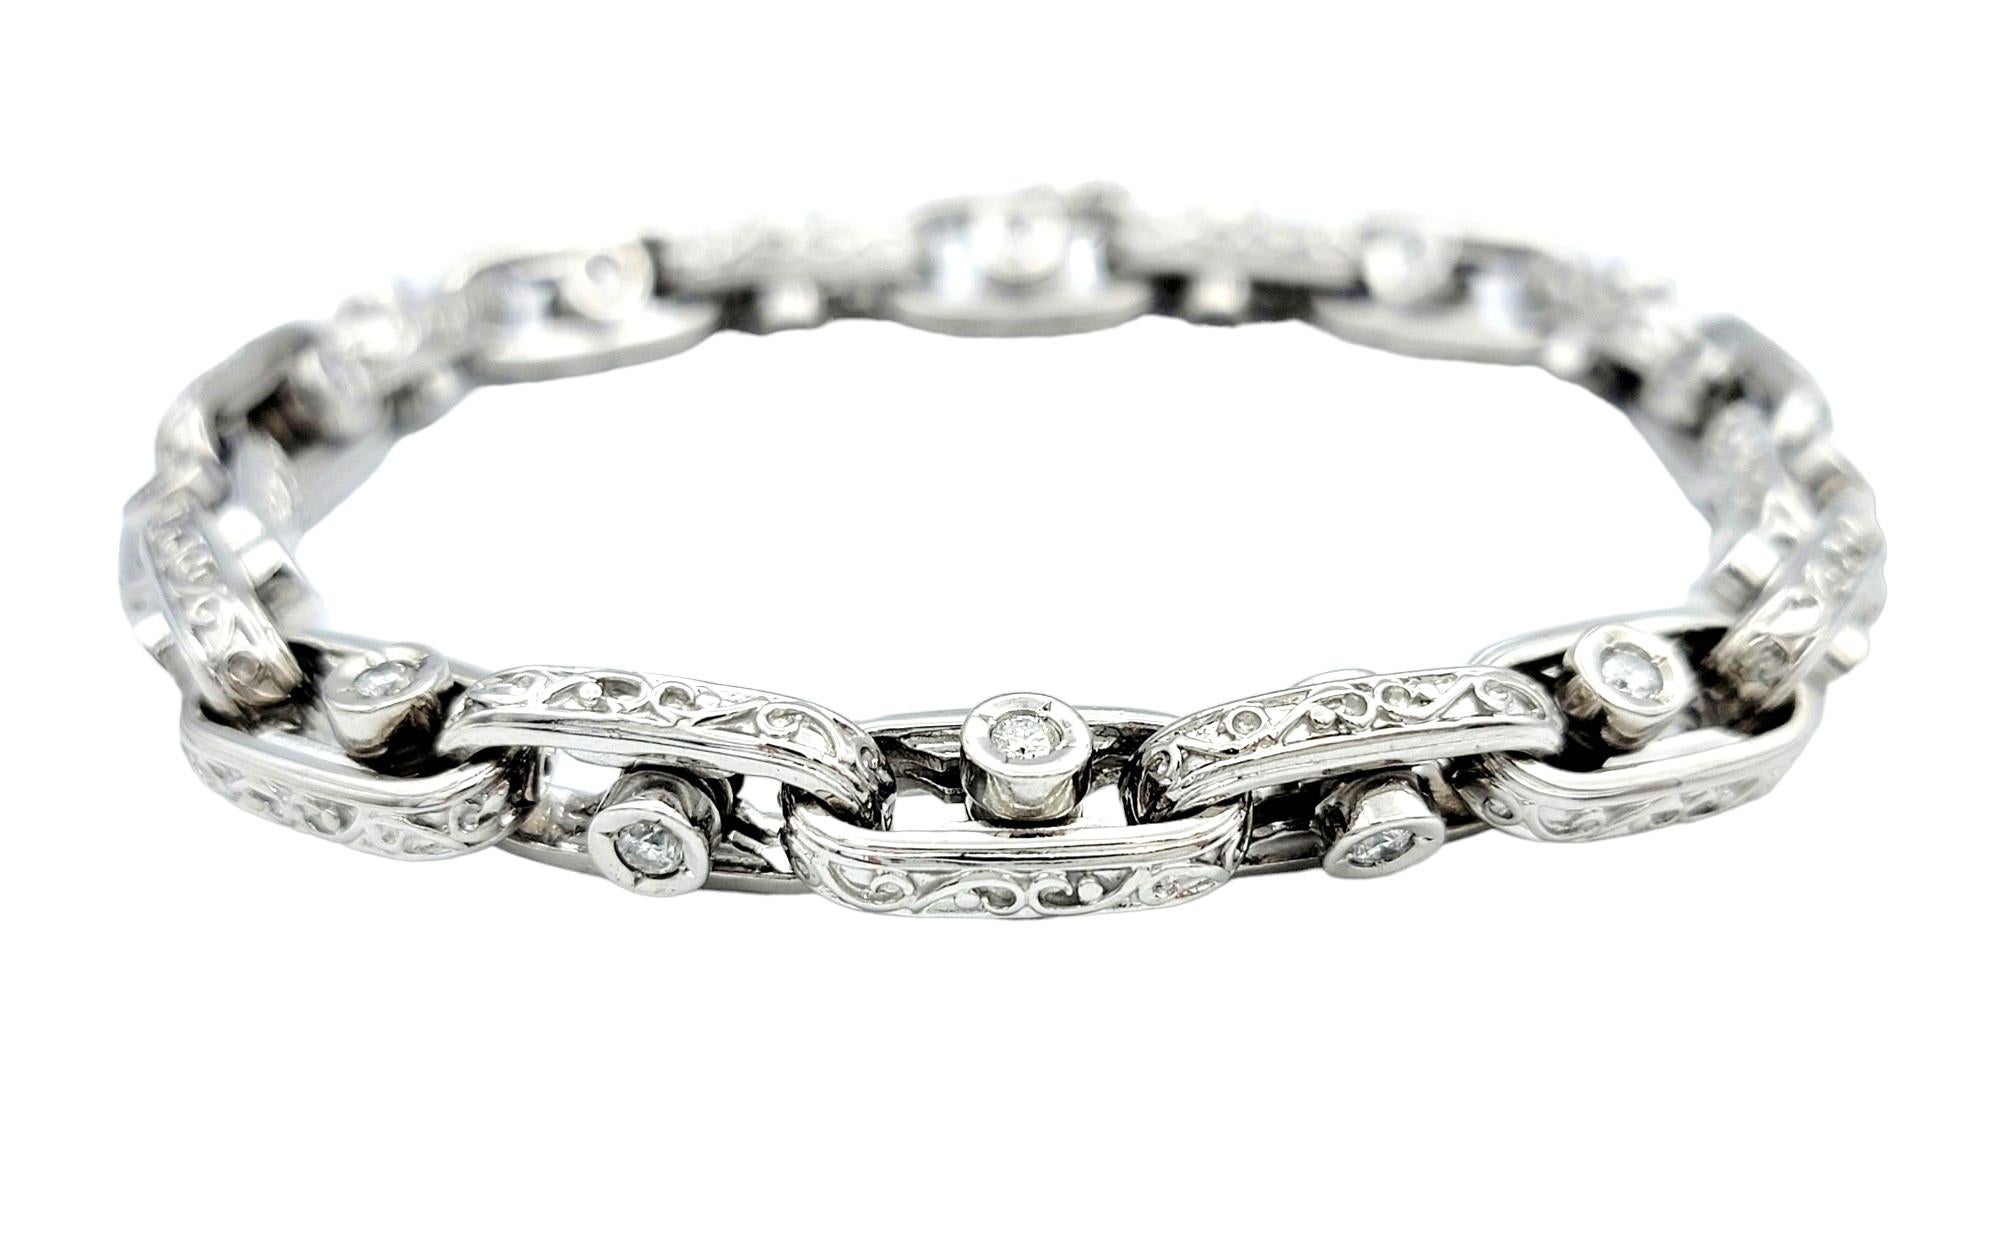 This chic bracelet, crafted in 14 karat white gold, is a dazzling expression of sophistication and ingenuity. Its design features large oval links, each adorned with a single sliding diamond that adds a dynamic and captivating element to the piece.